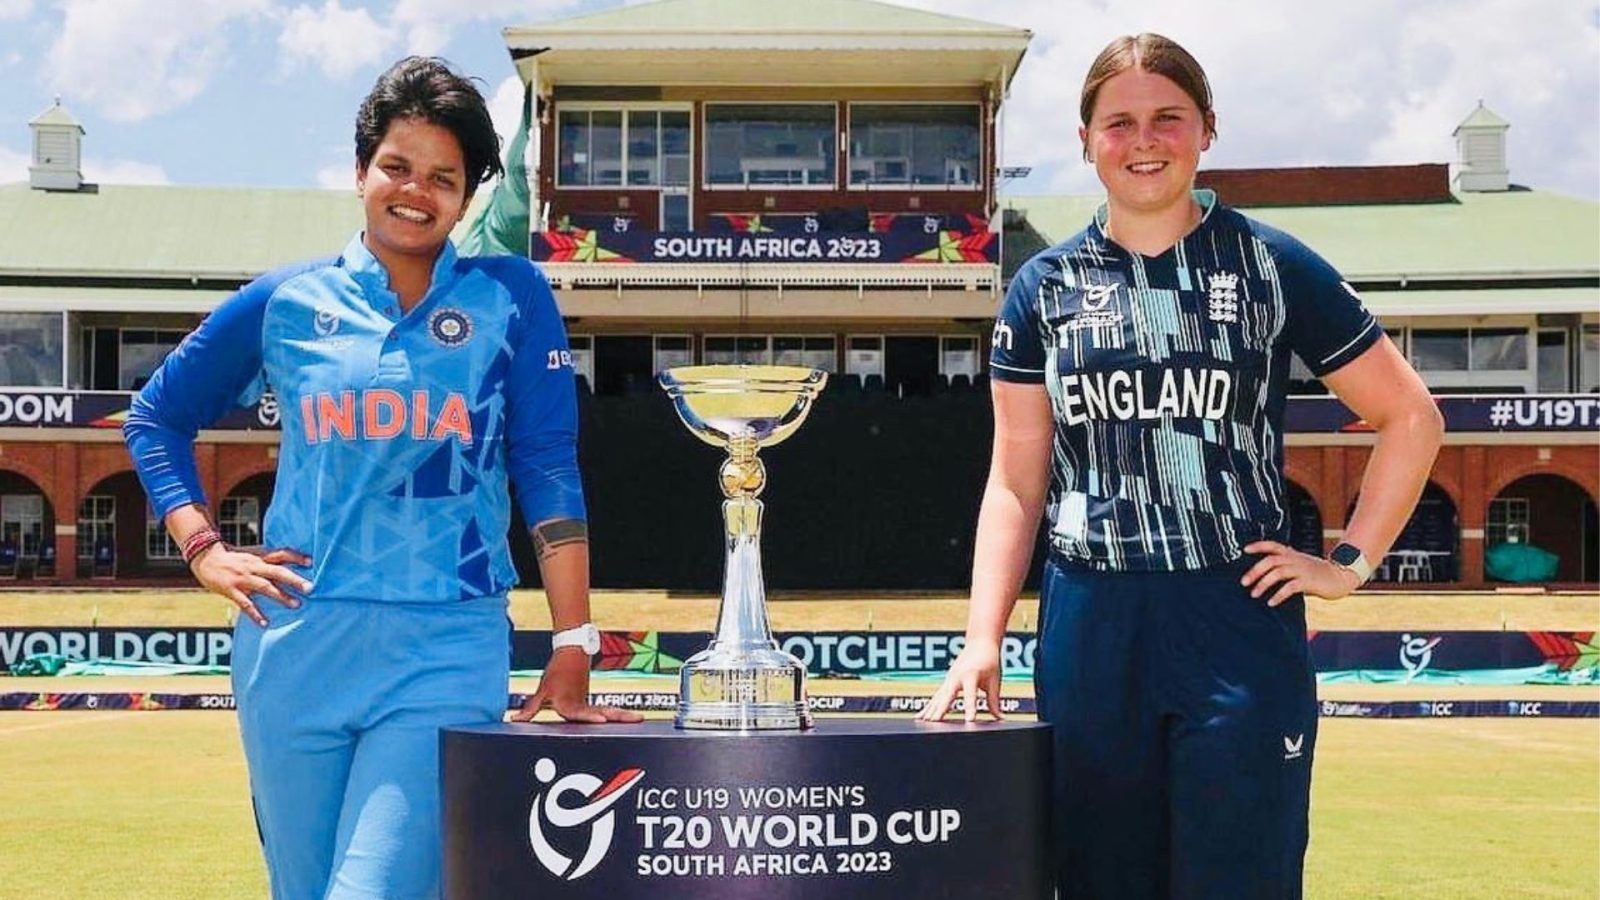 Meet Shafali Verma Who Led India To The U19 Womens T20 World Cup Win